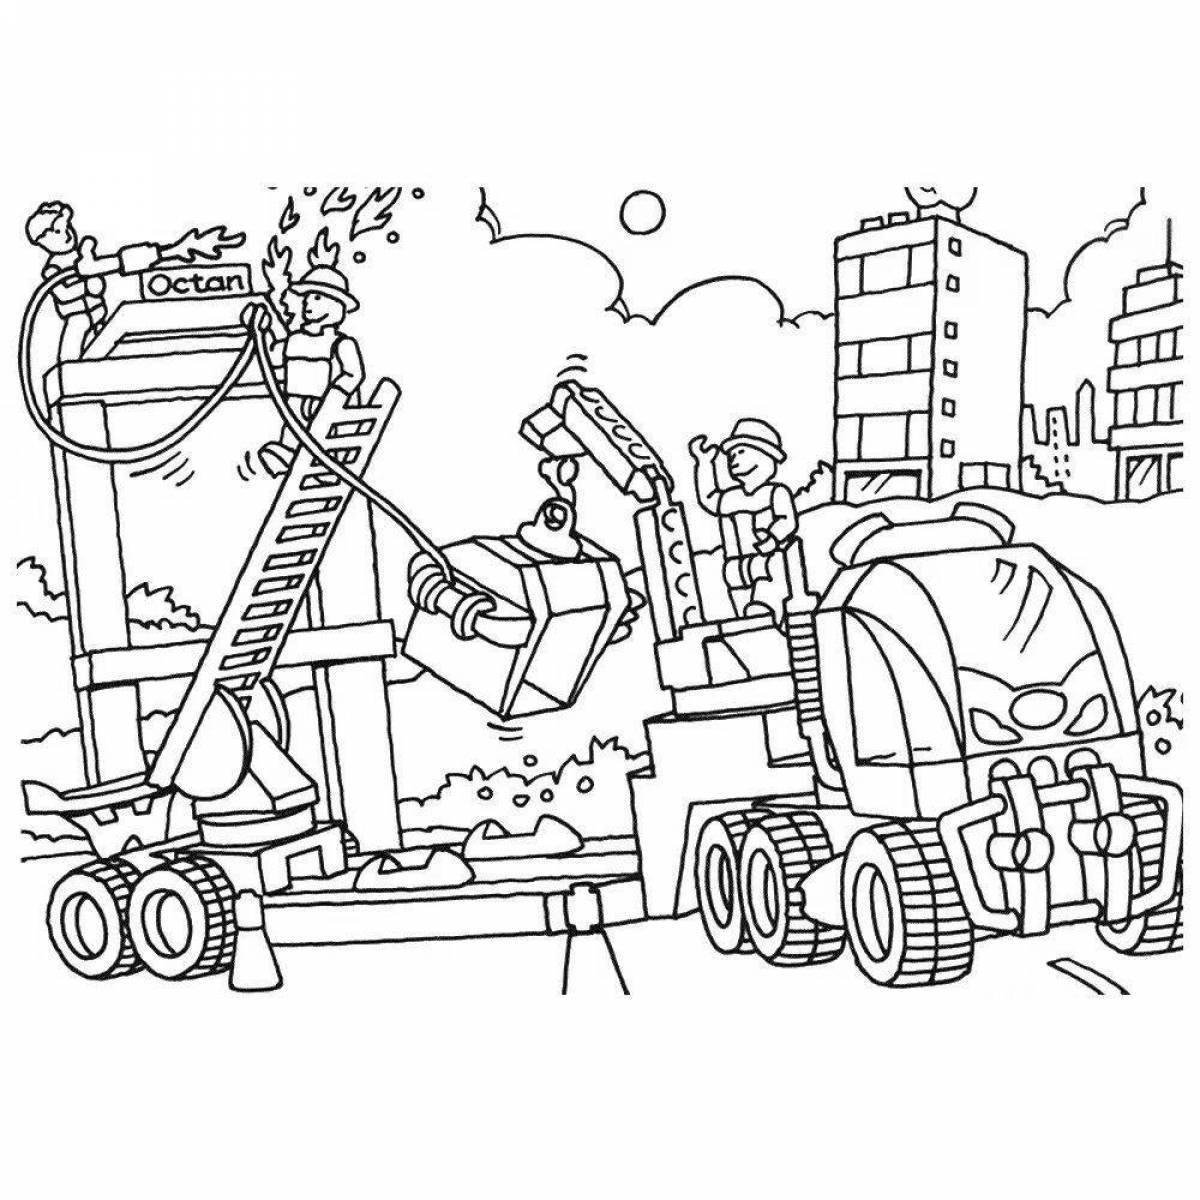 Shiny colors lego building coloring page